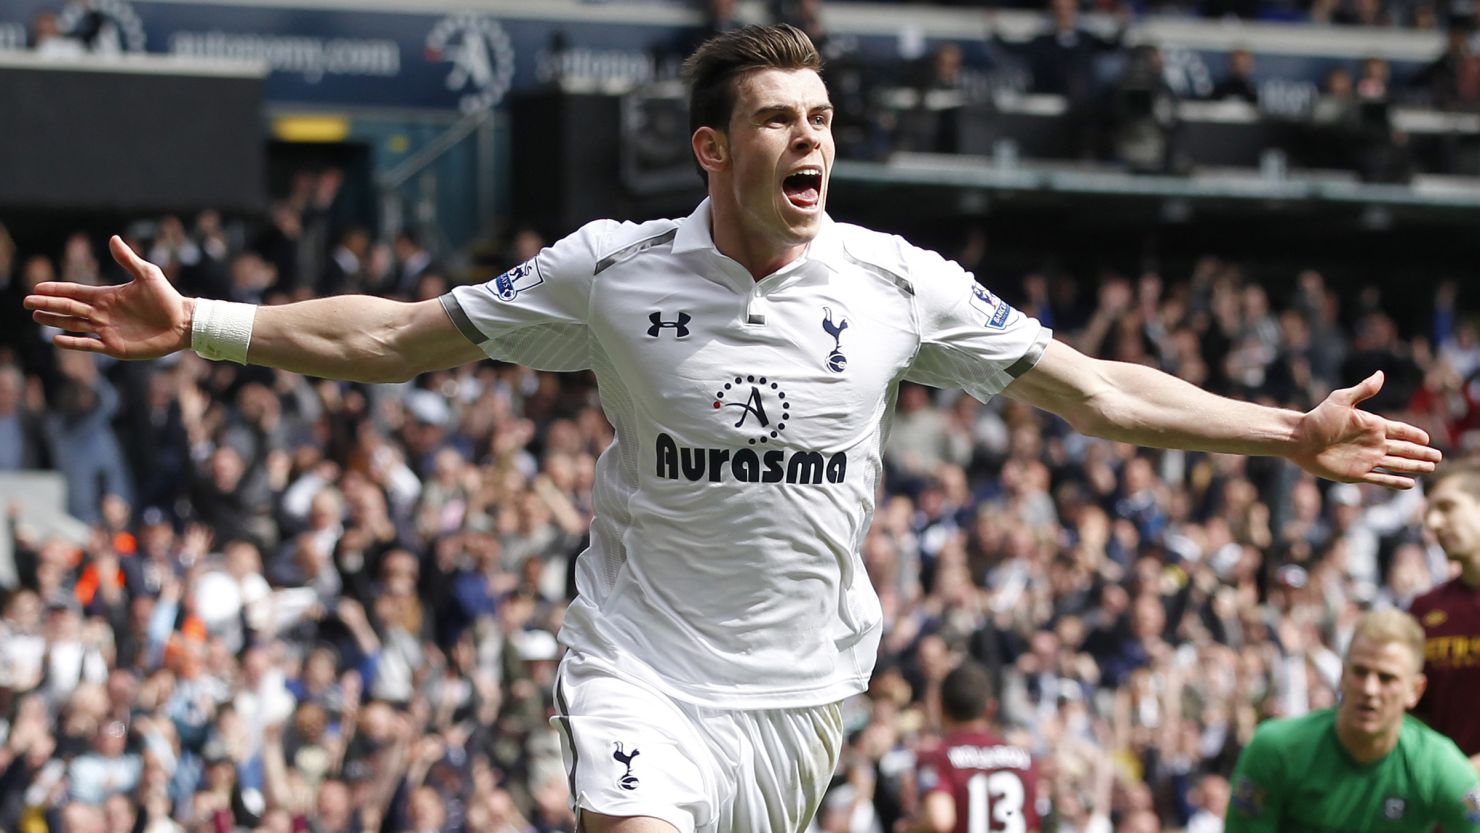 Tottenham Hotspurs' Gareth Bale was also named Player of the Year in 2011.